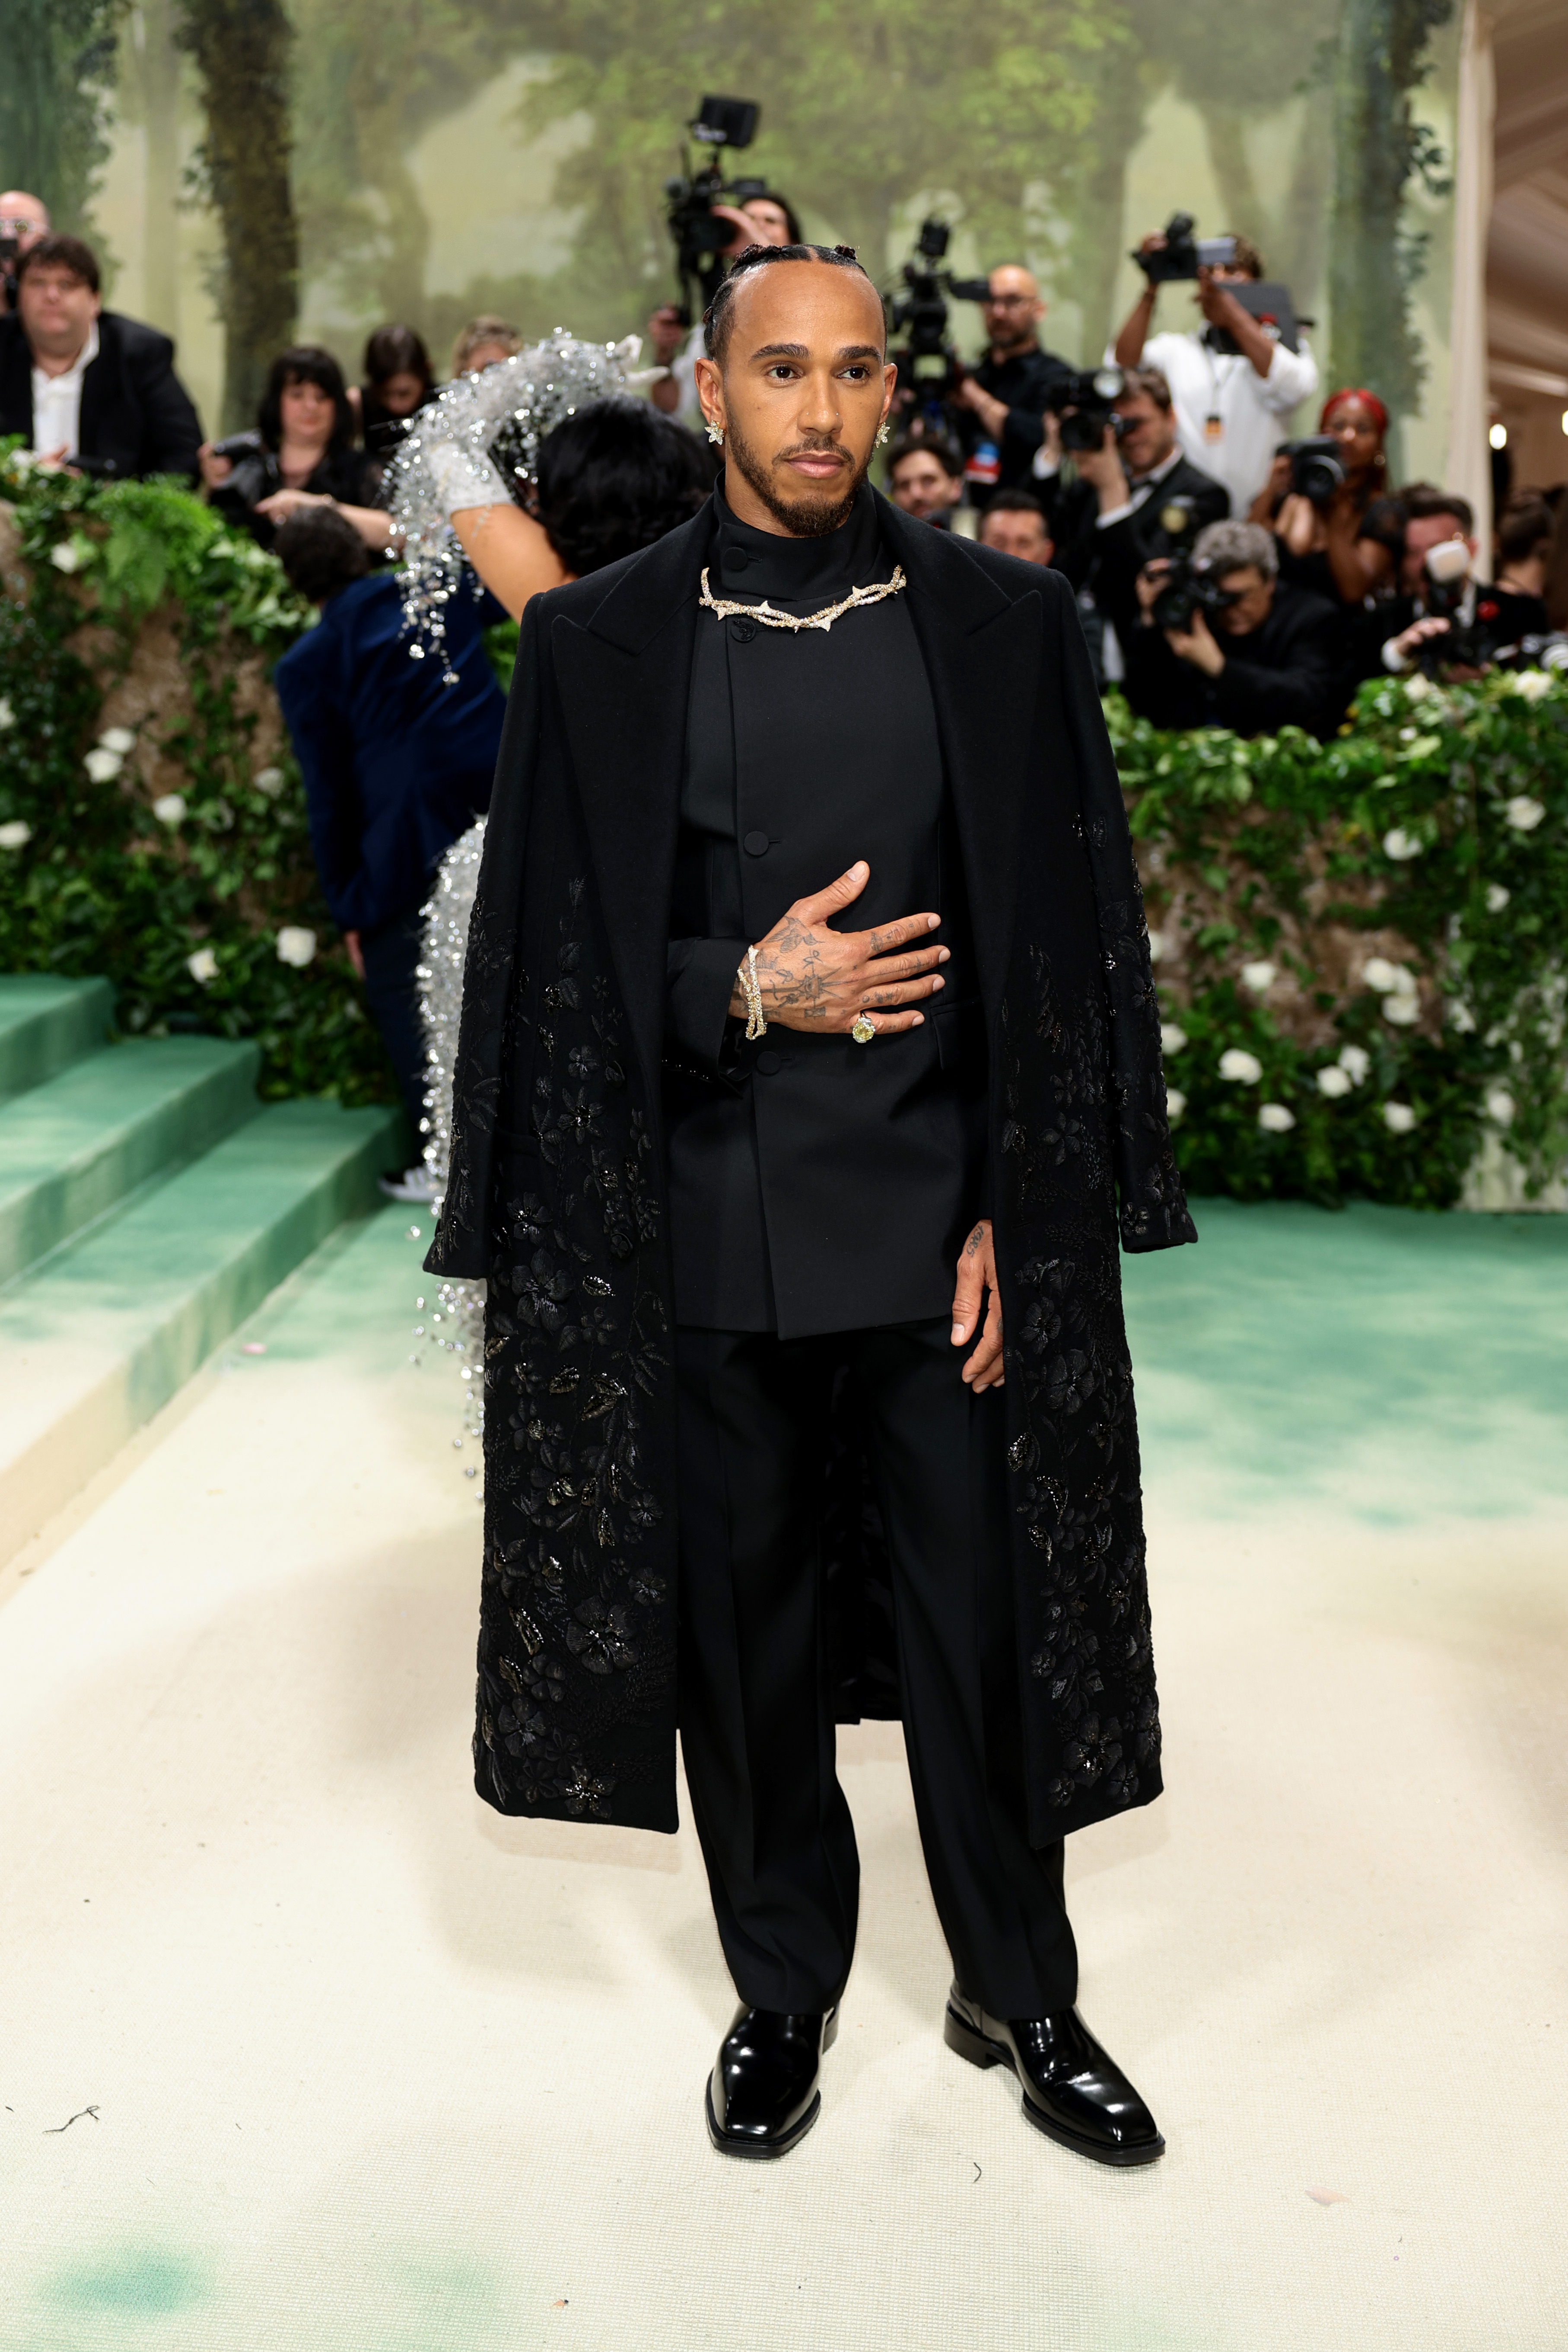 Lewis Hamilton wearing a black beaded Burberry suit at the Met Gala.